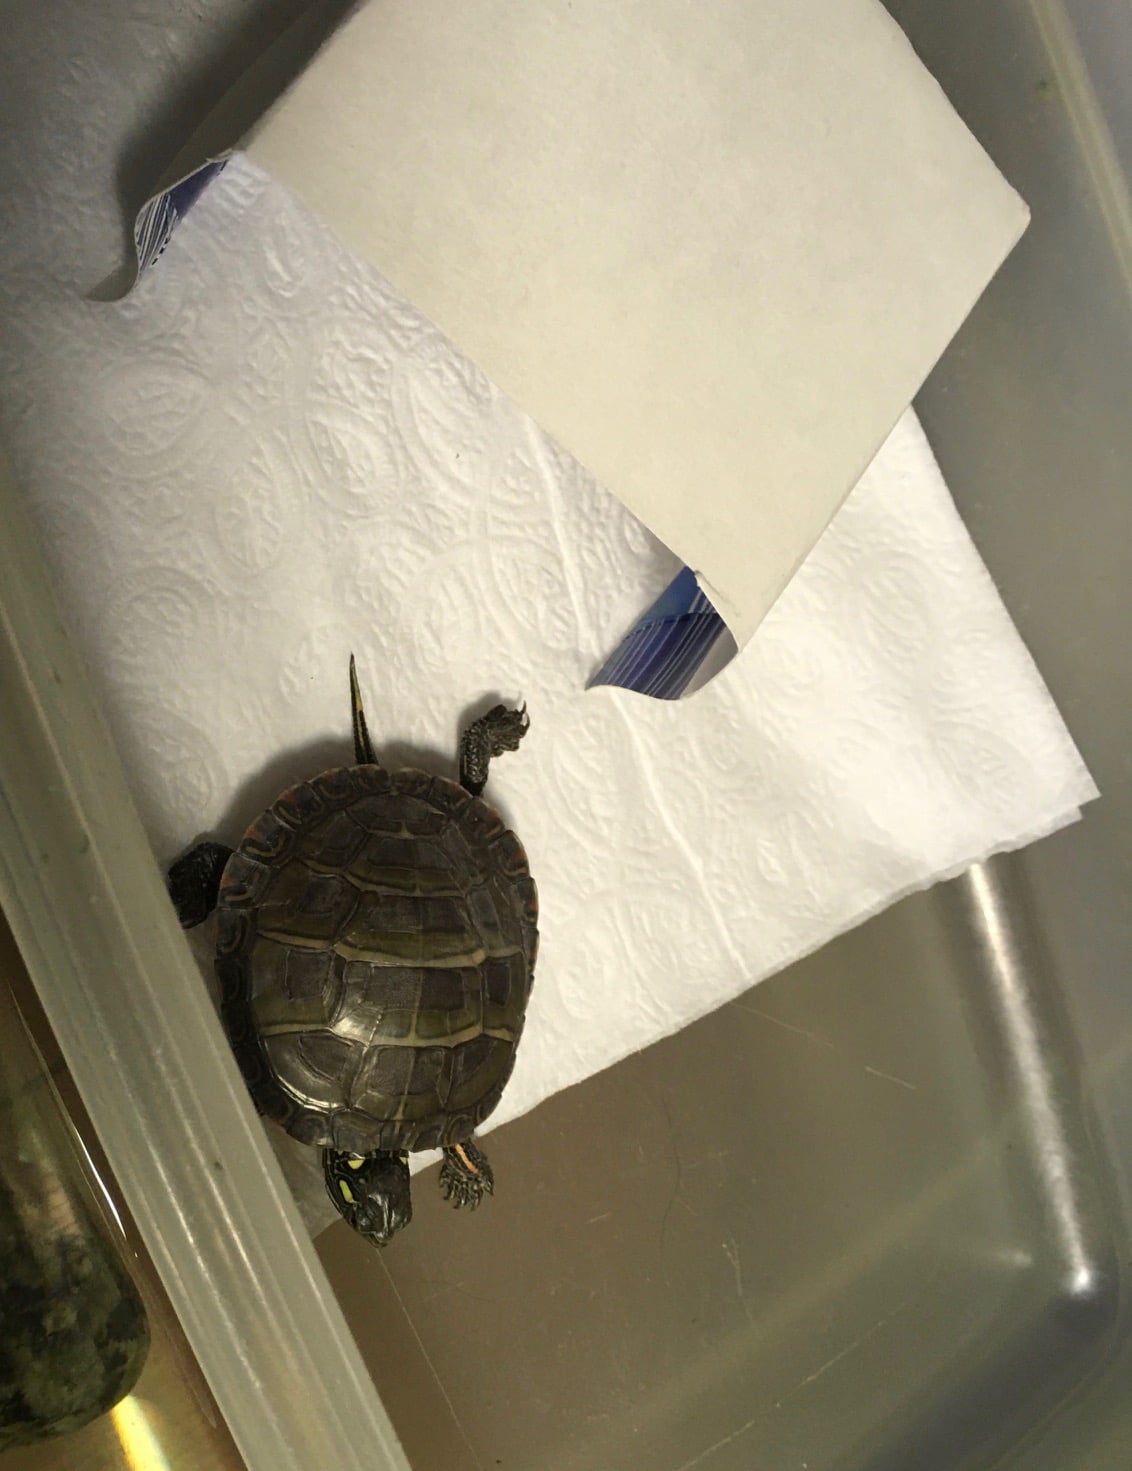 Monet the infant painted turtle recovering in his warm, dry hospital box